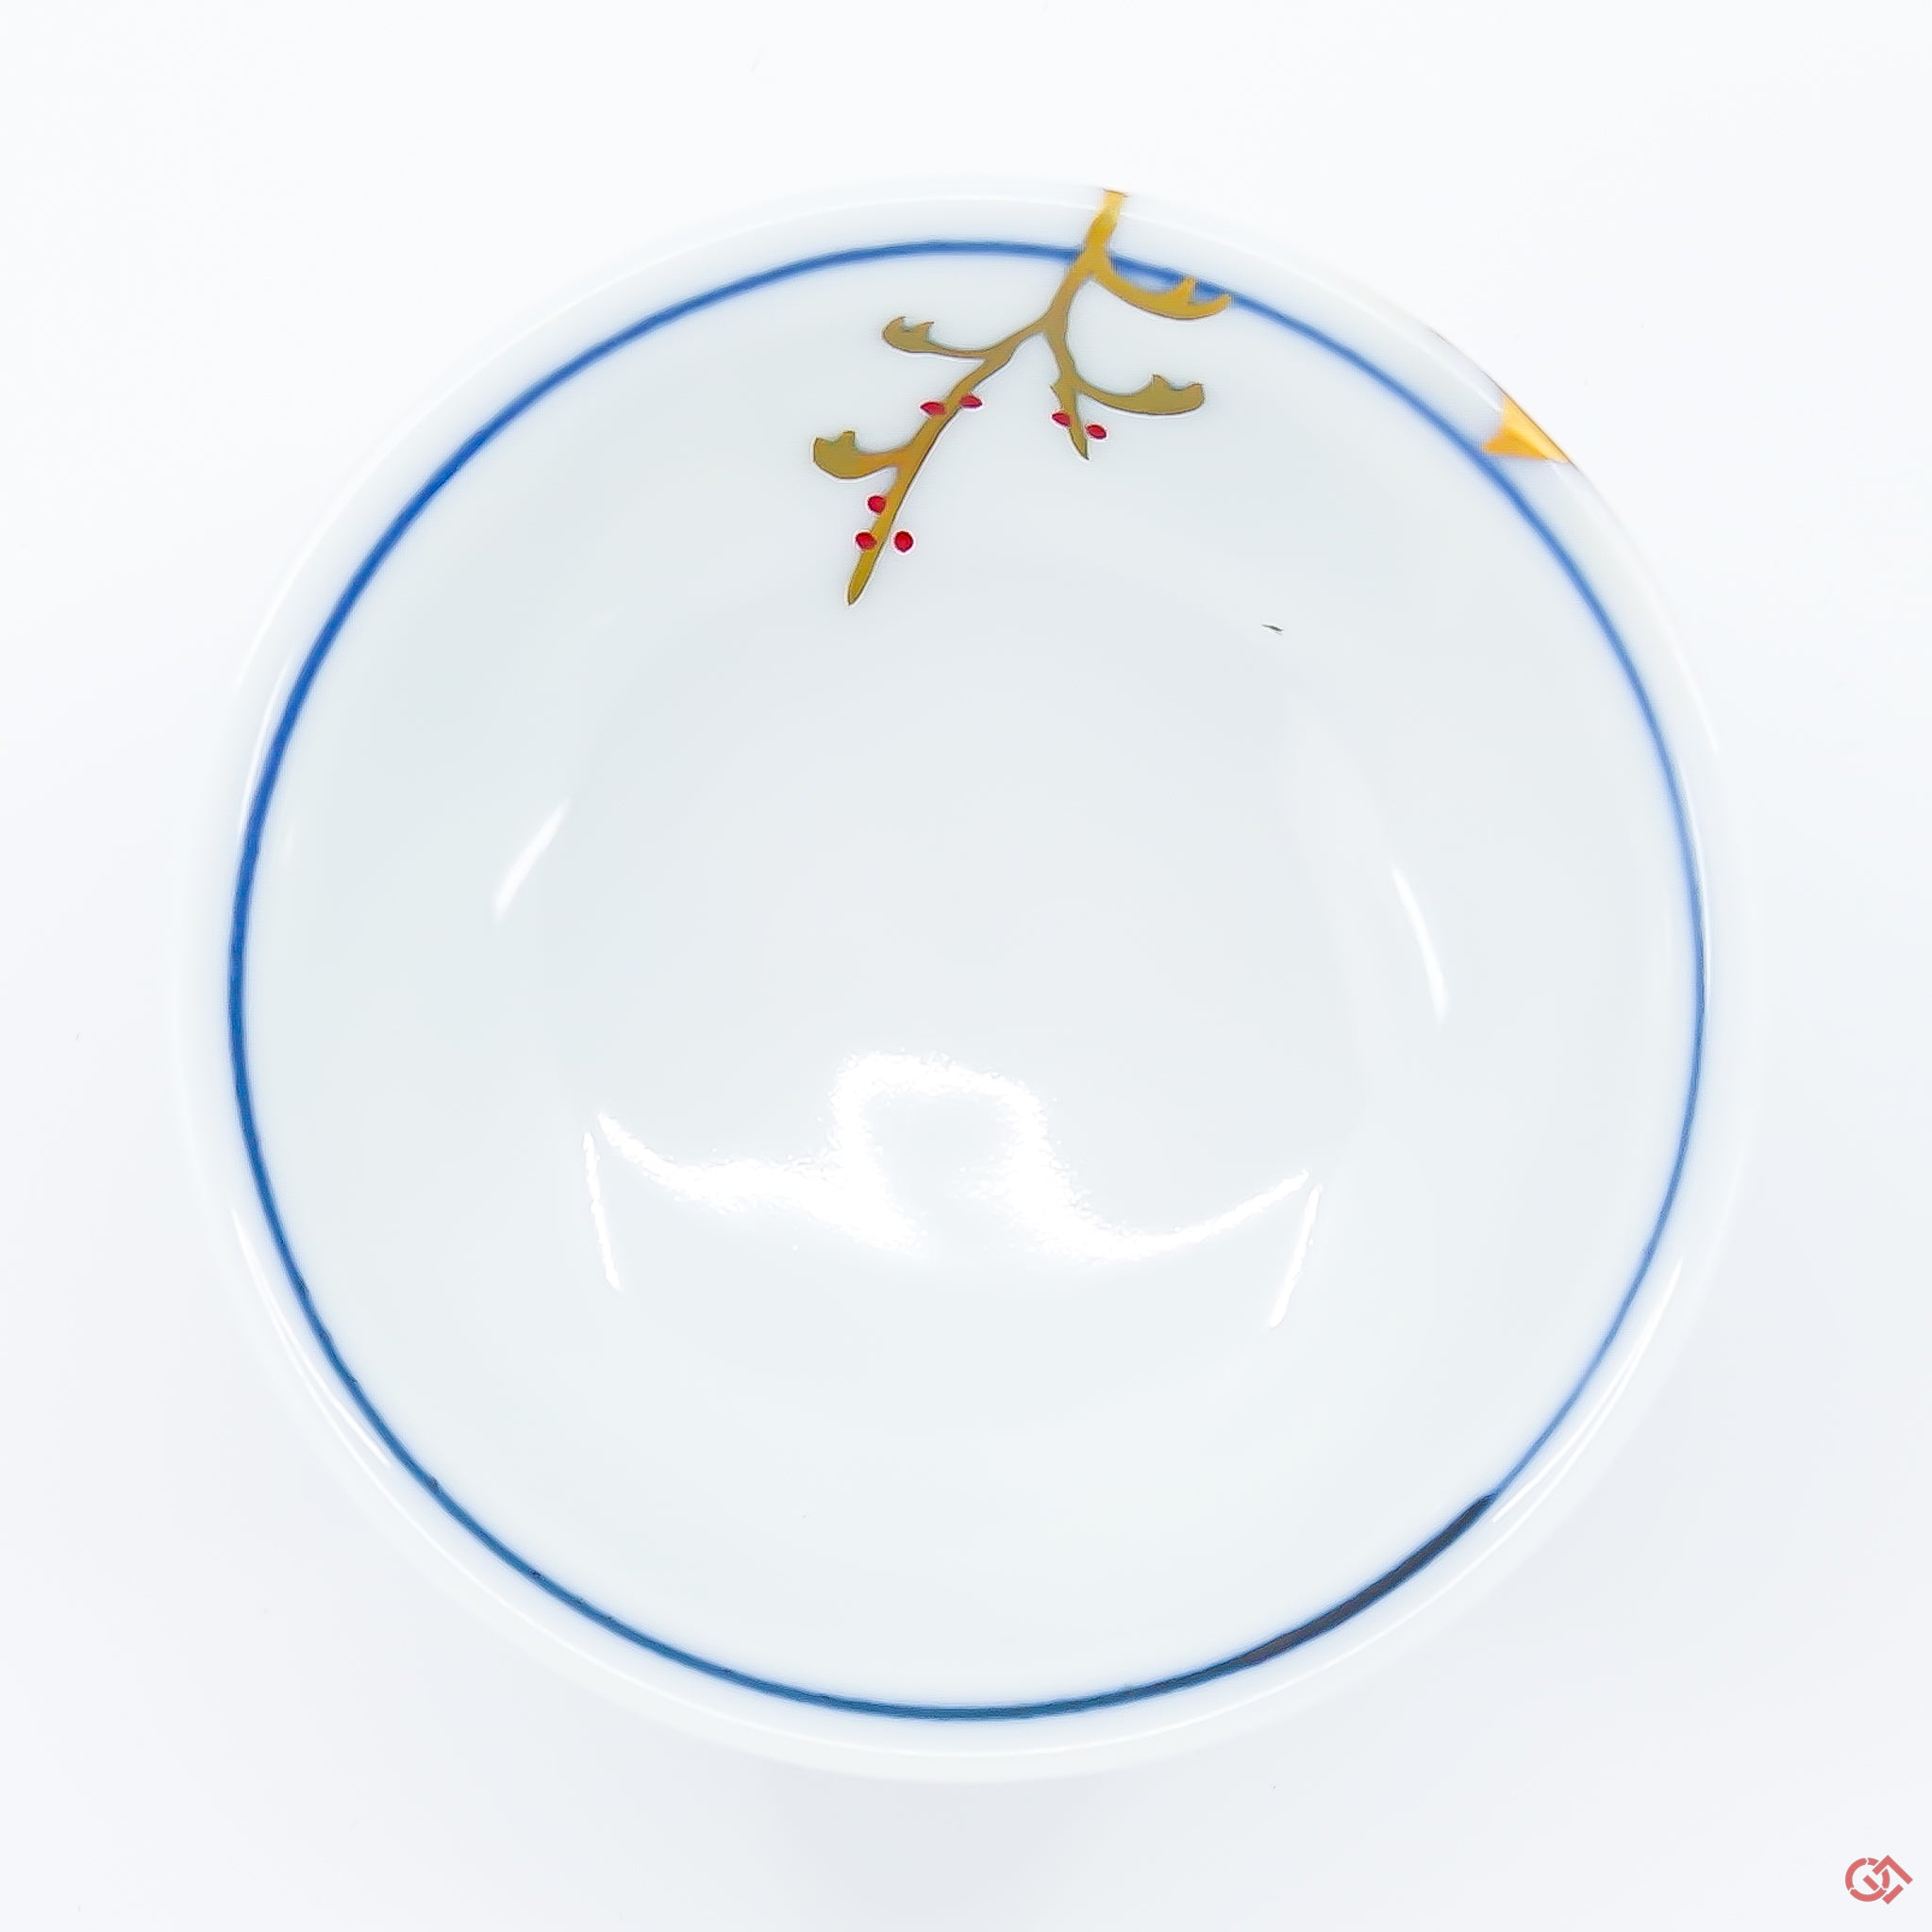 Photo of the top side of an authentic Kintsugi pottery piece, showing its overall design and features